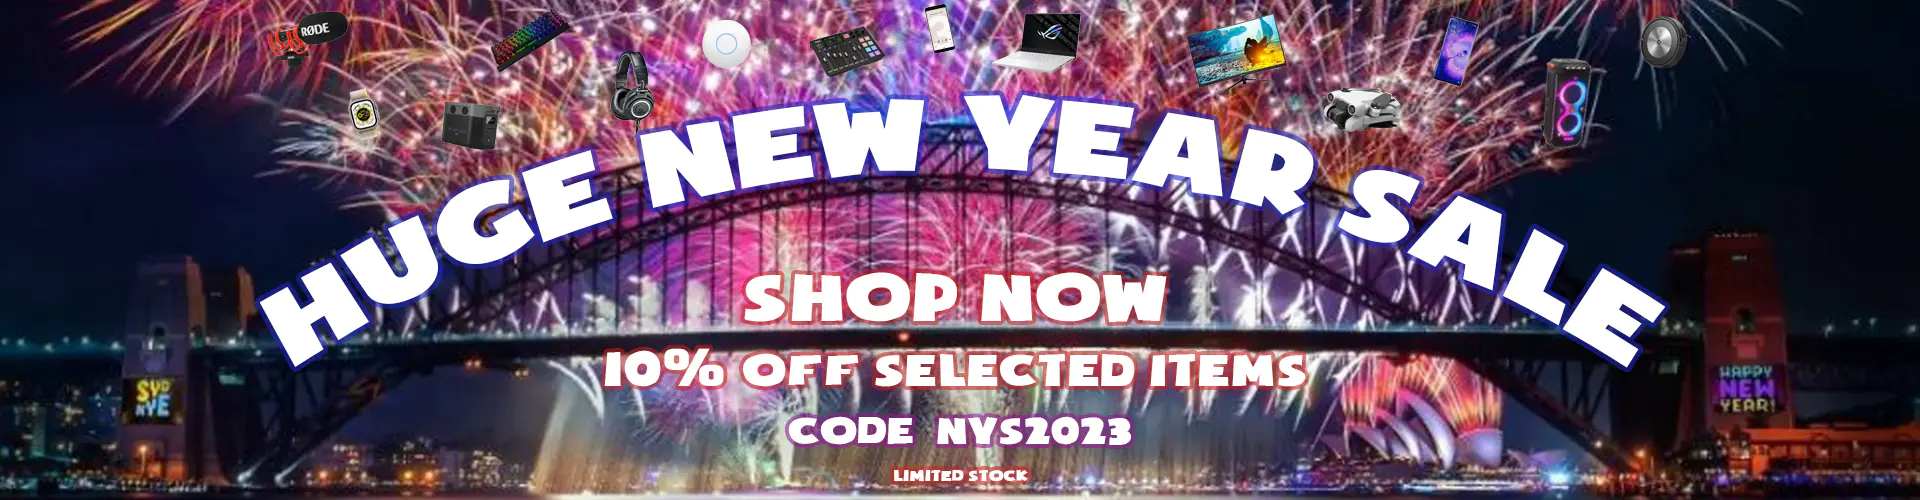 Wireless1 New Year sale - Extra 10% OFF selected items with promo code